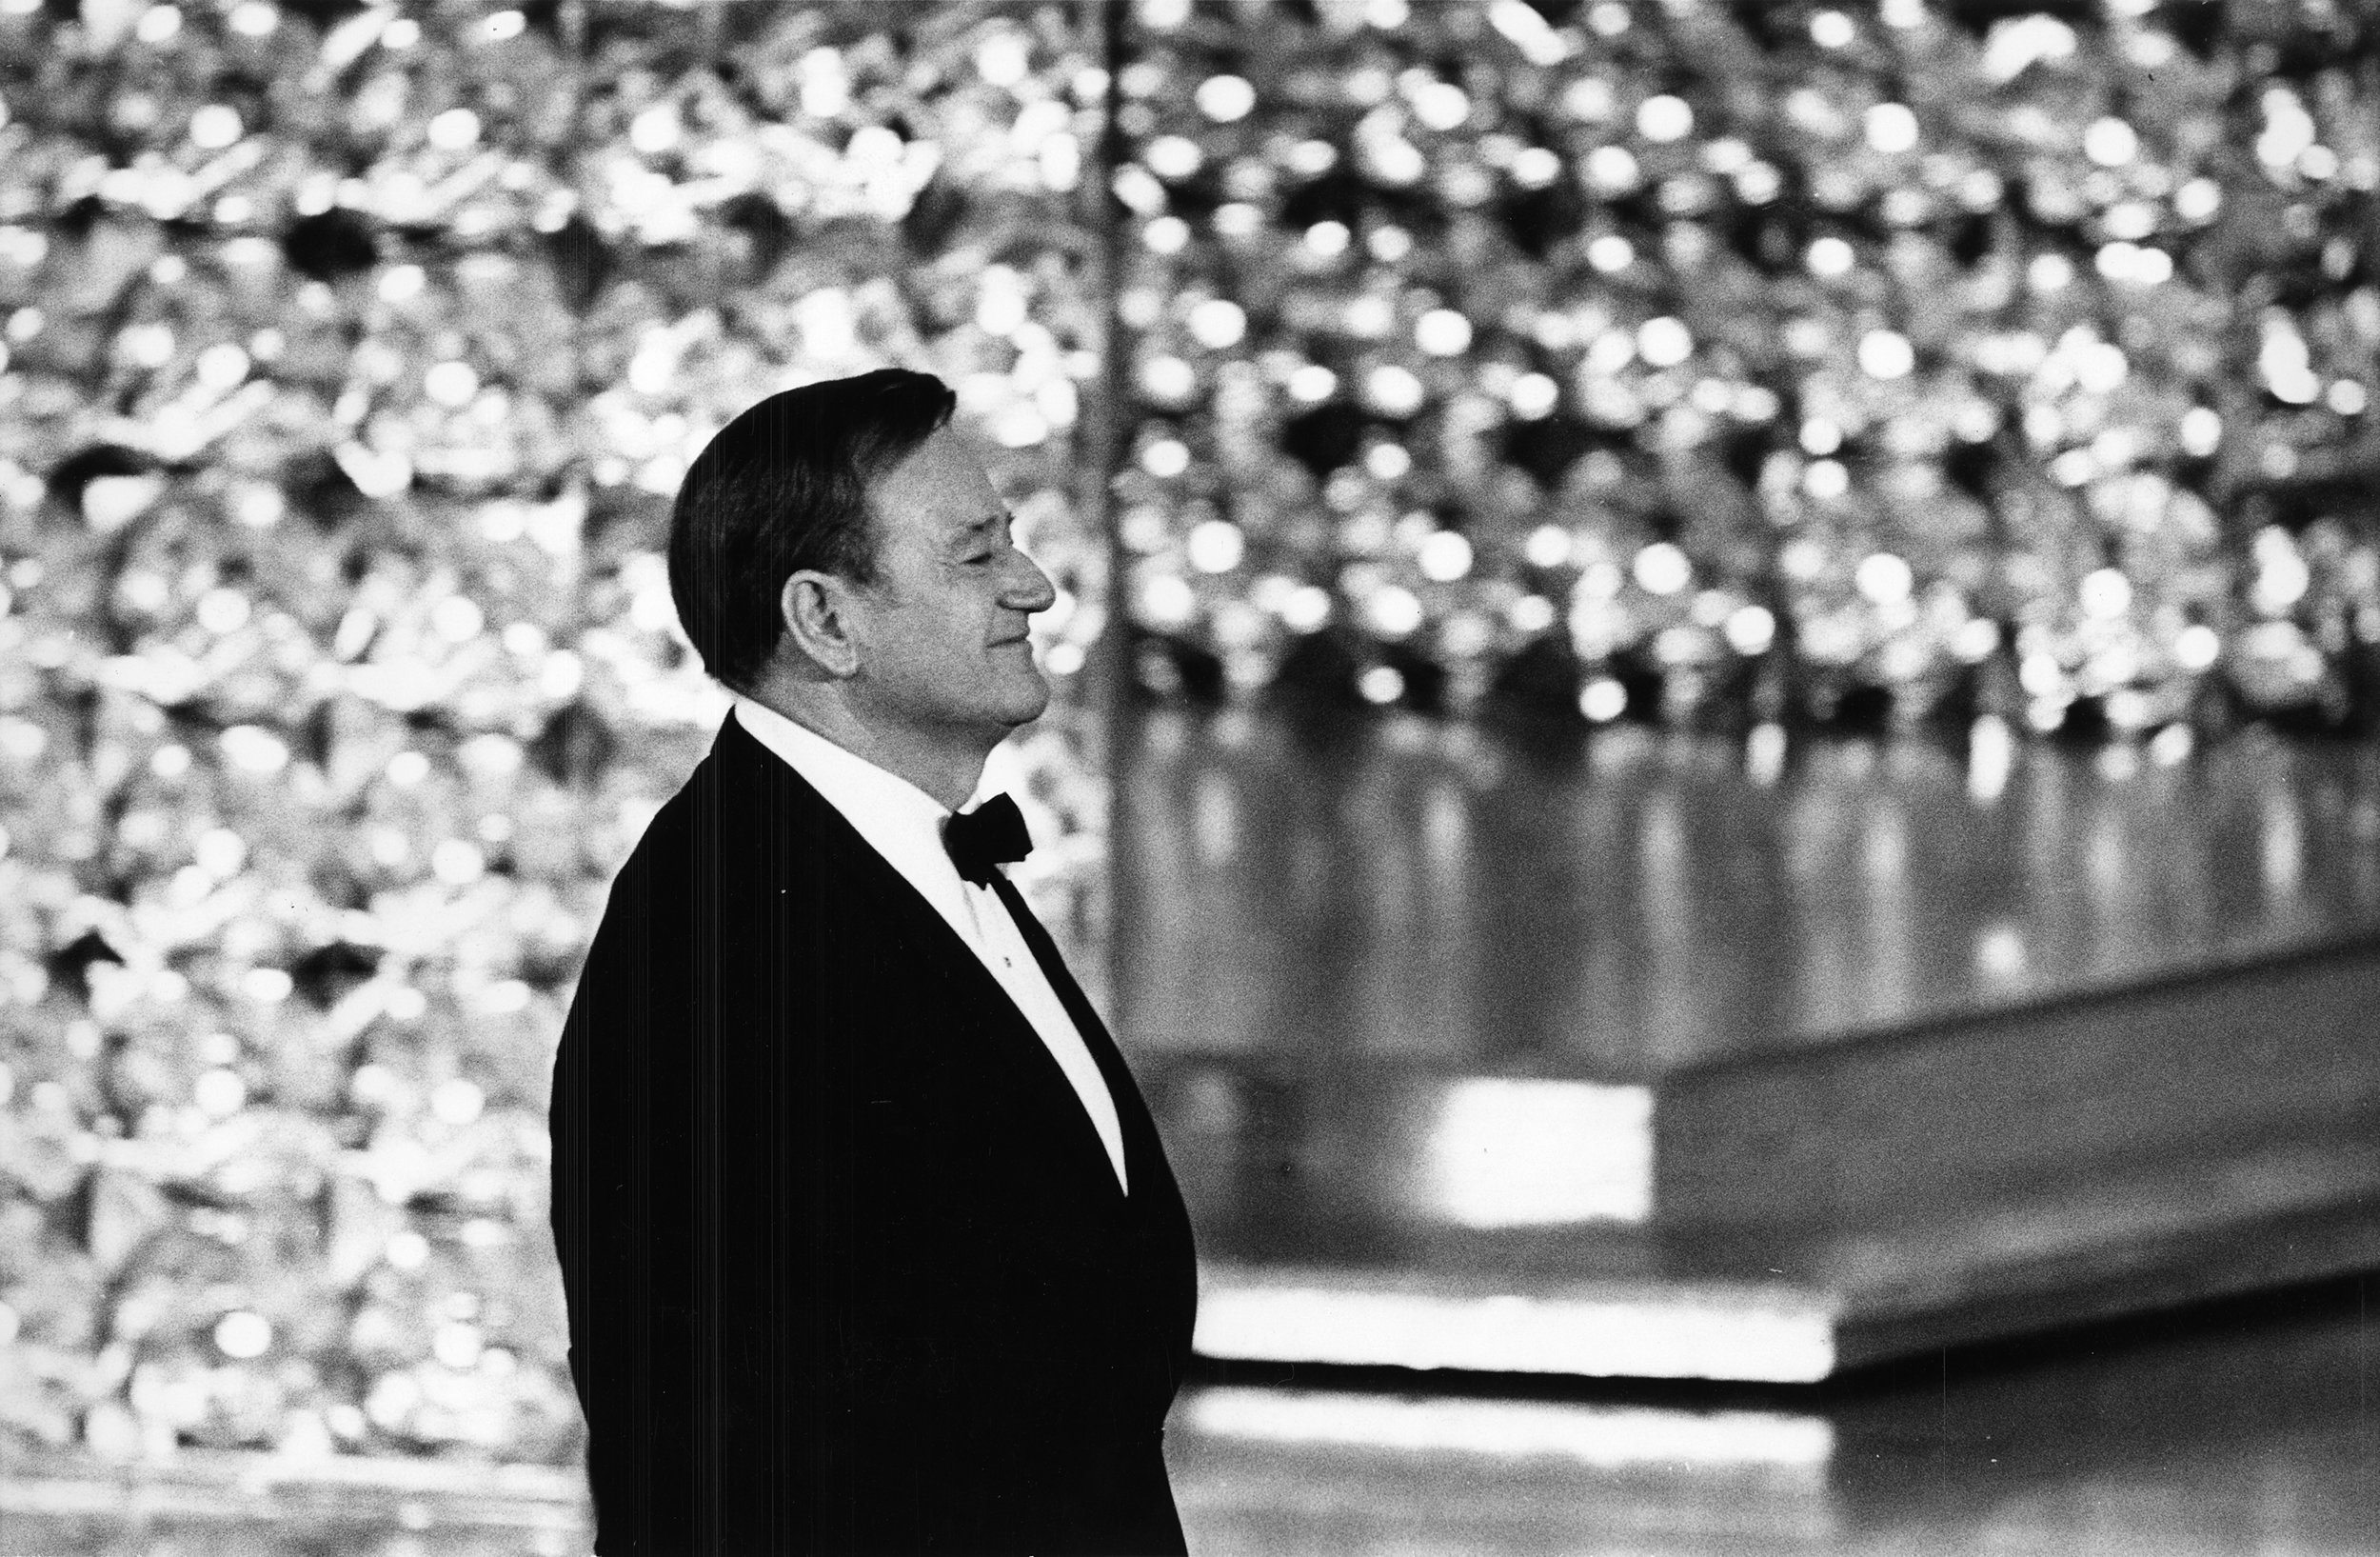 In 1970, John Wayne at the 42nd Annual Academy Awards receiving a Best Actor Academy Award for his performance in True Grit (1969), stating: “Wow! If I’d have known that, I would have put that eye patch on 35 years earlier!”